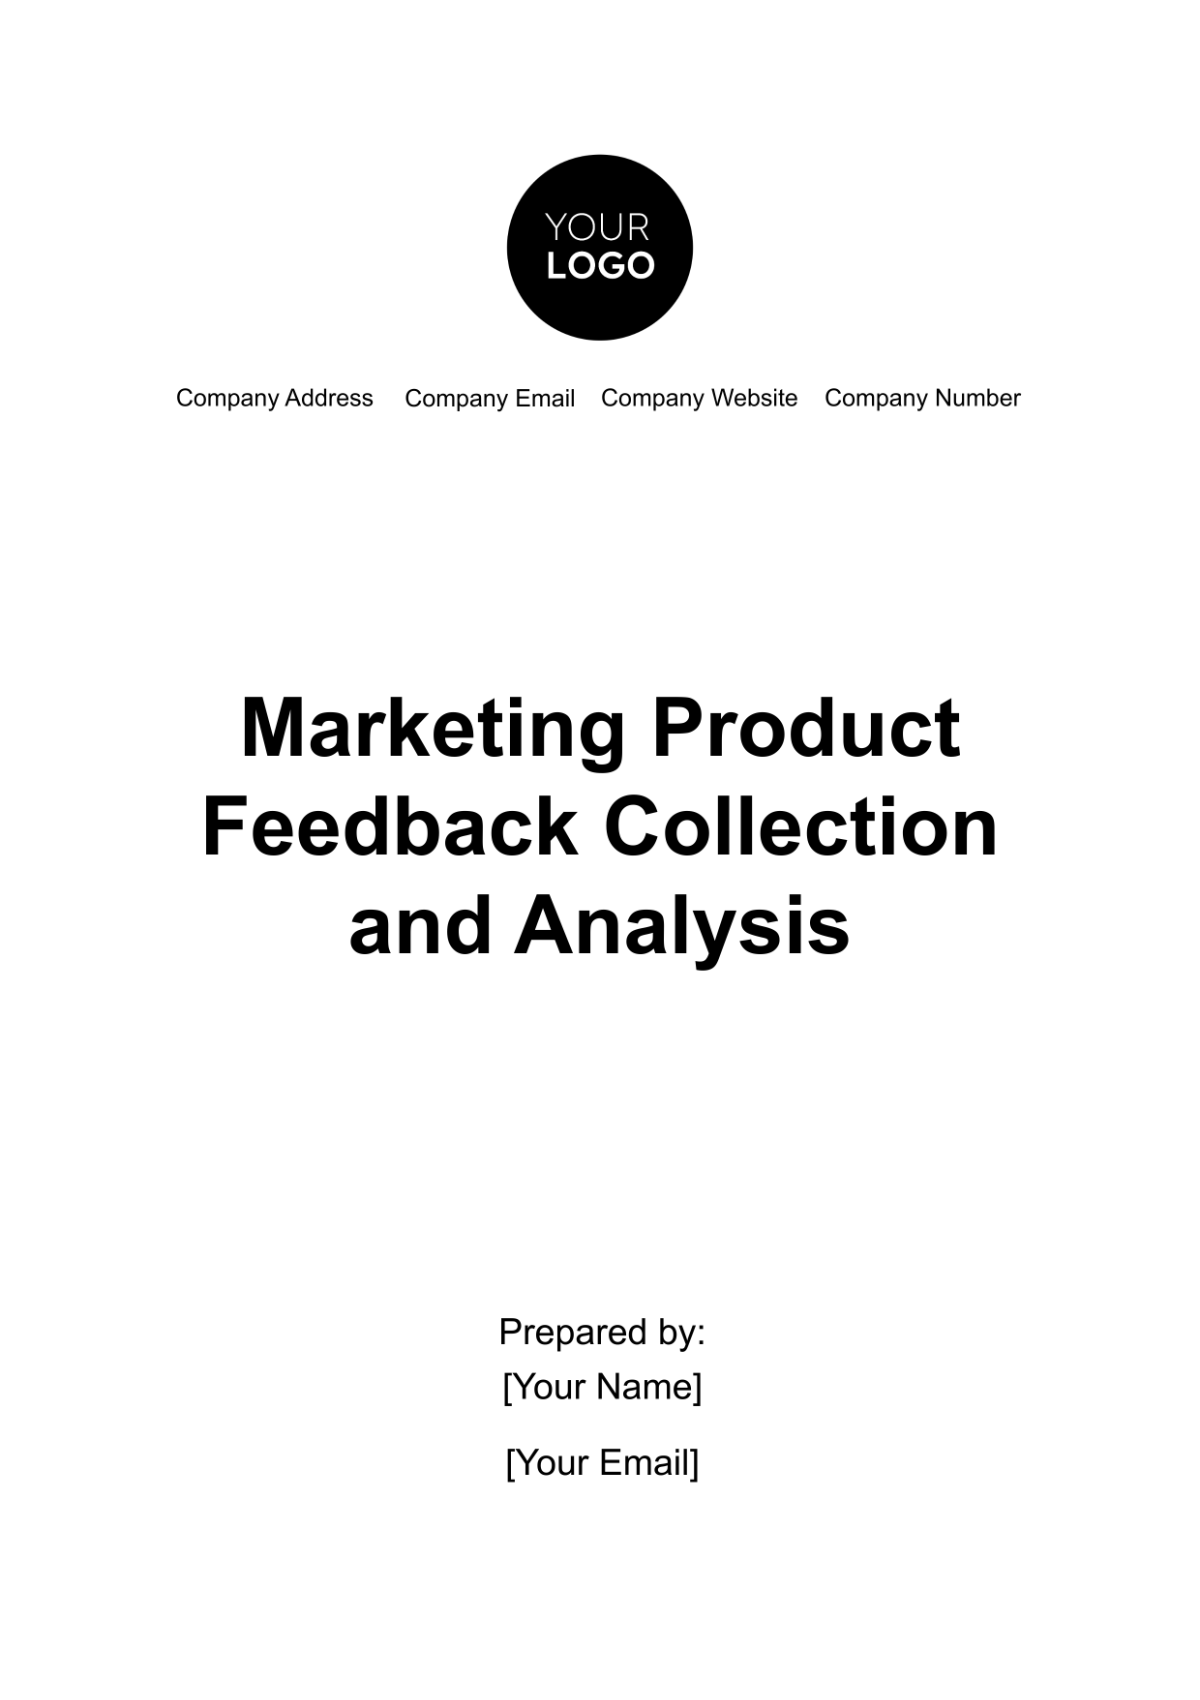 Marketing Product Feedback Collection and Analysis Template